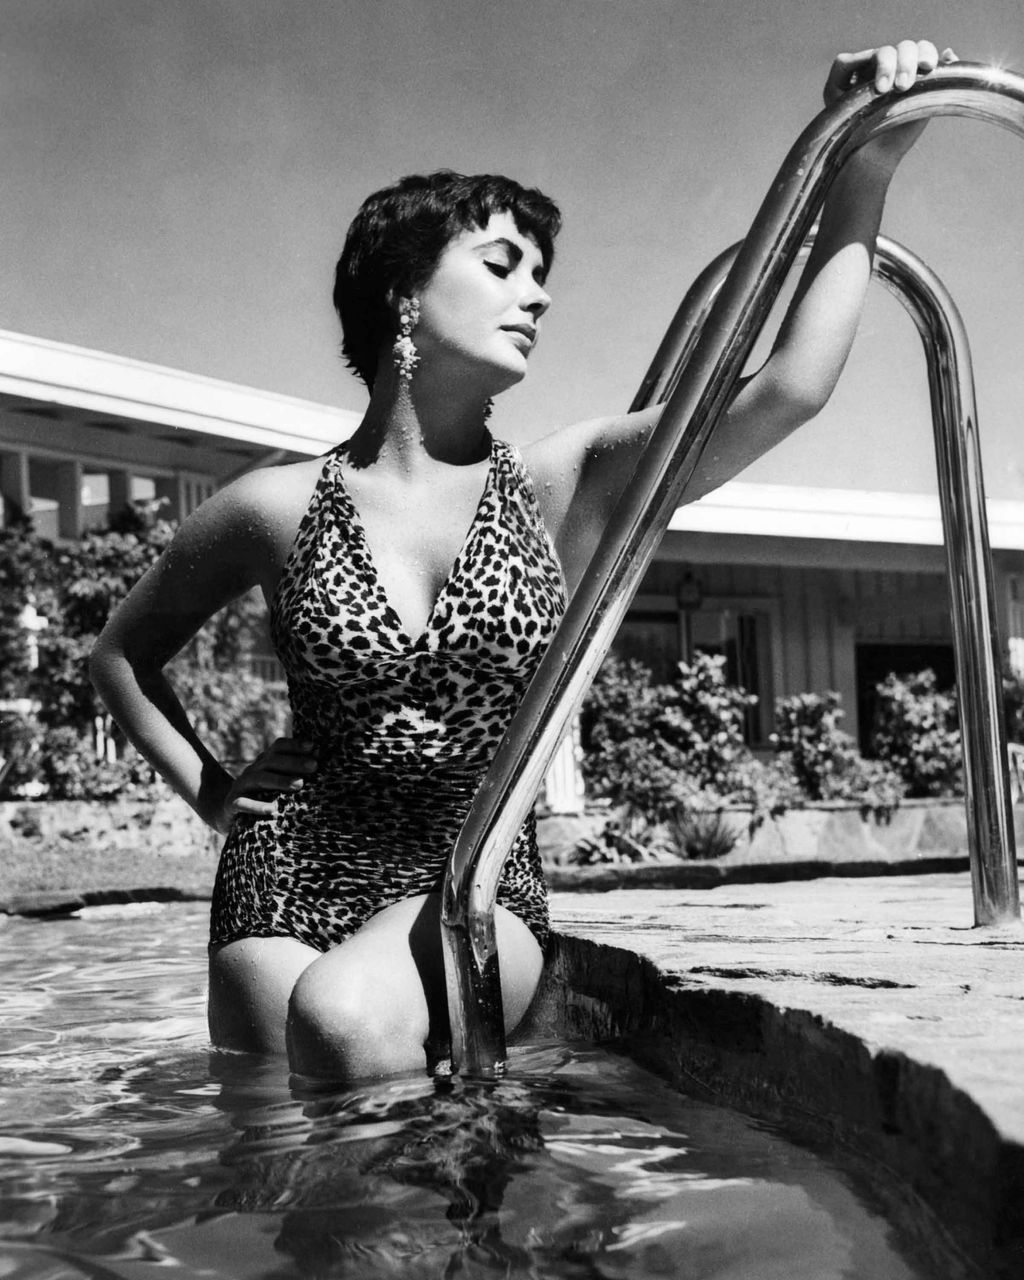 Elizabeth Taylor emerging from the swimming pool in 1955